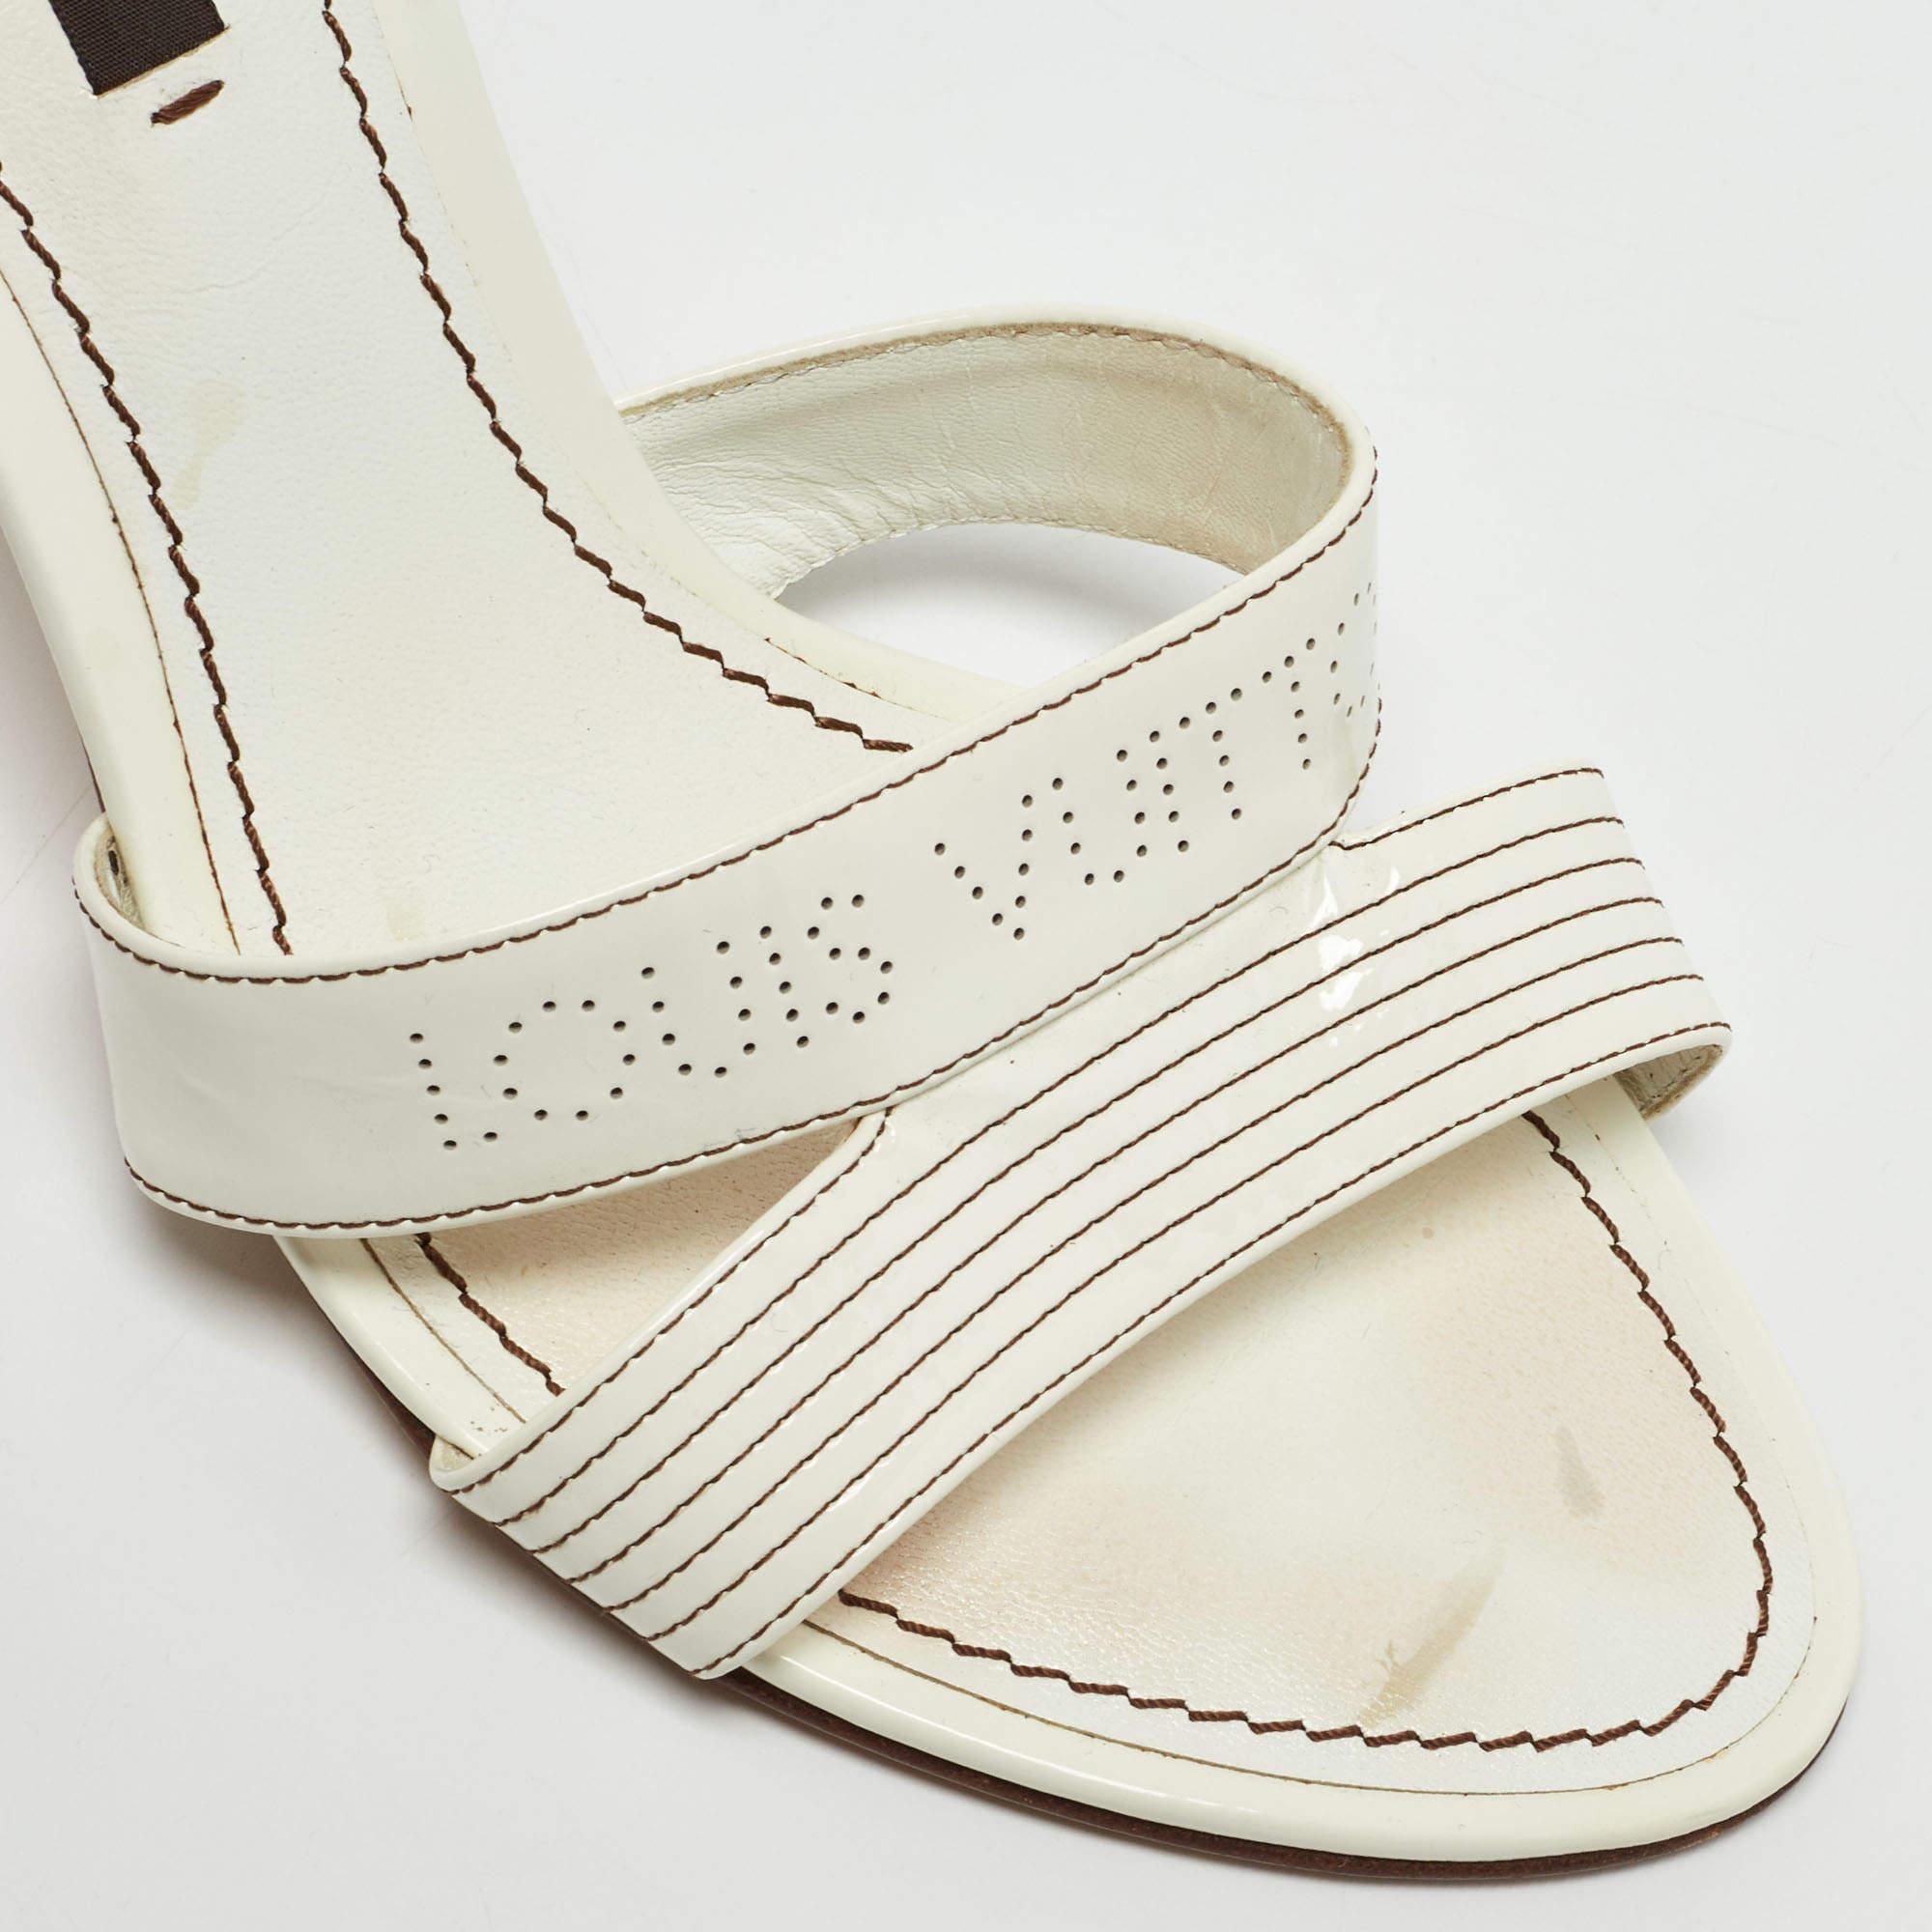 You can count on these Louis Vuitton sandals for an elevated feel. They are crafted beautifully and designed to offer the right fit and a comfortable lift.

